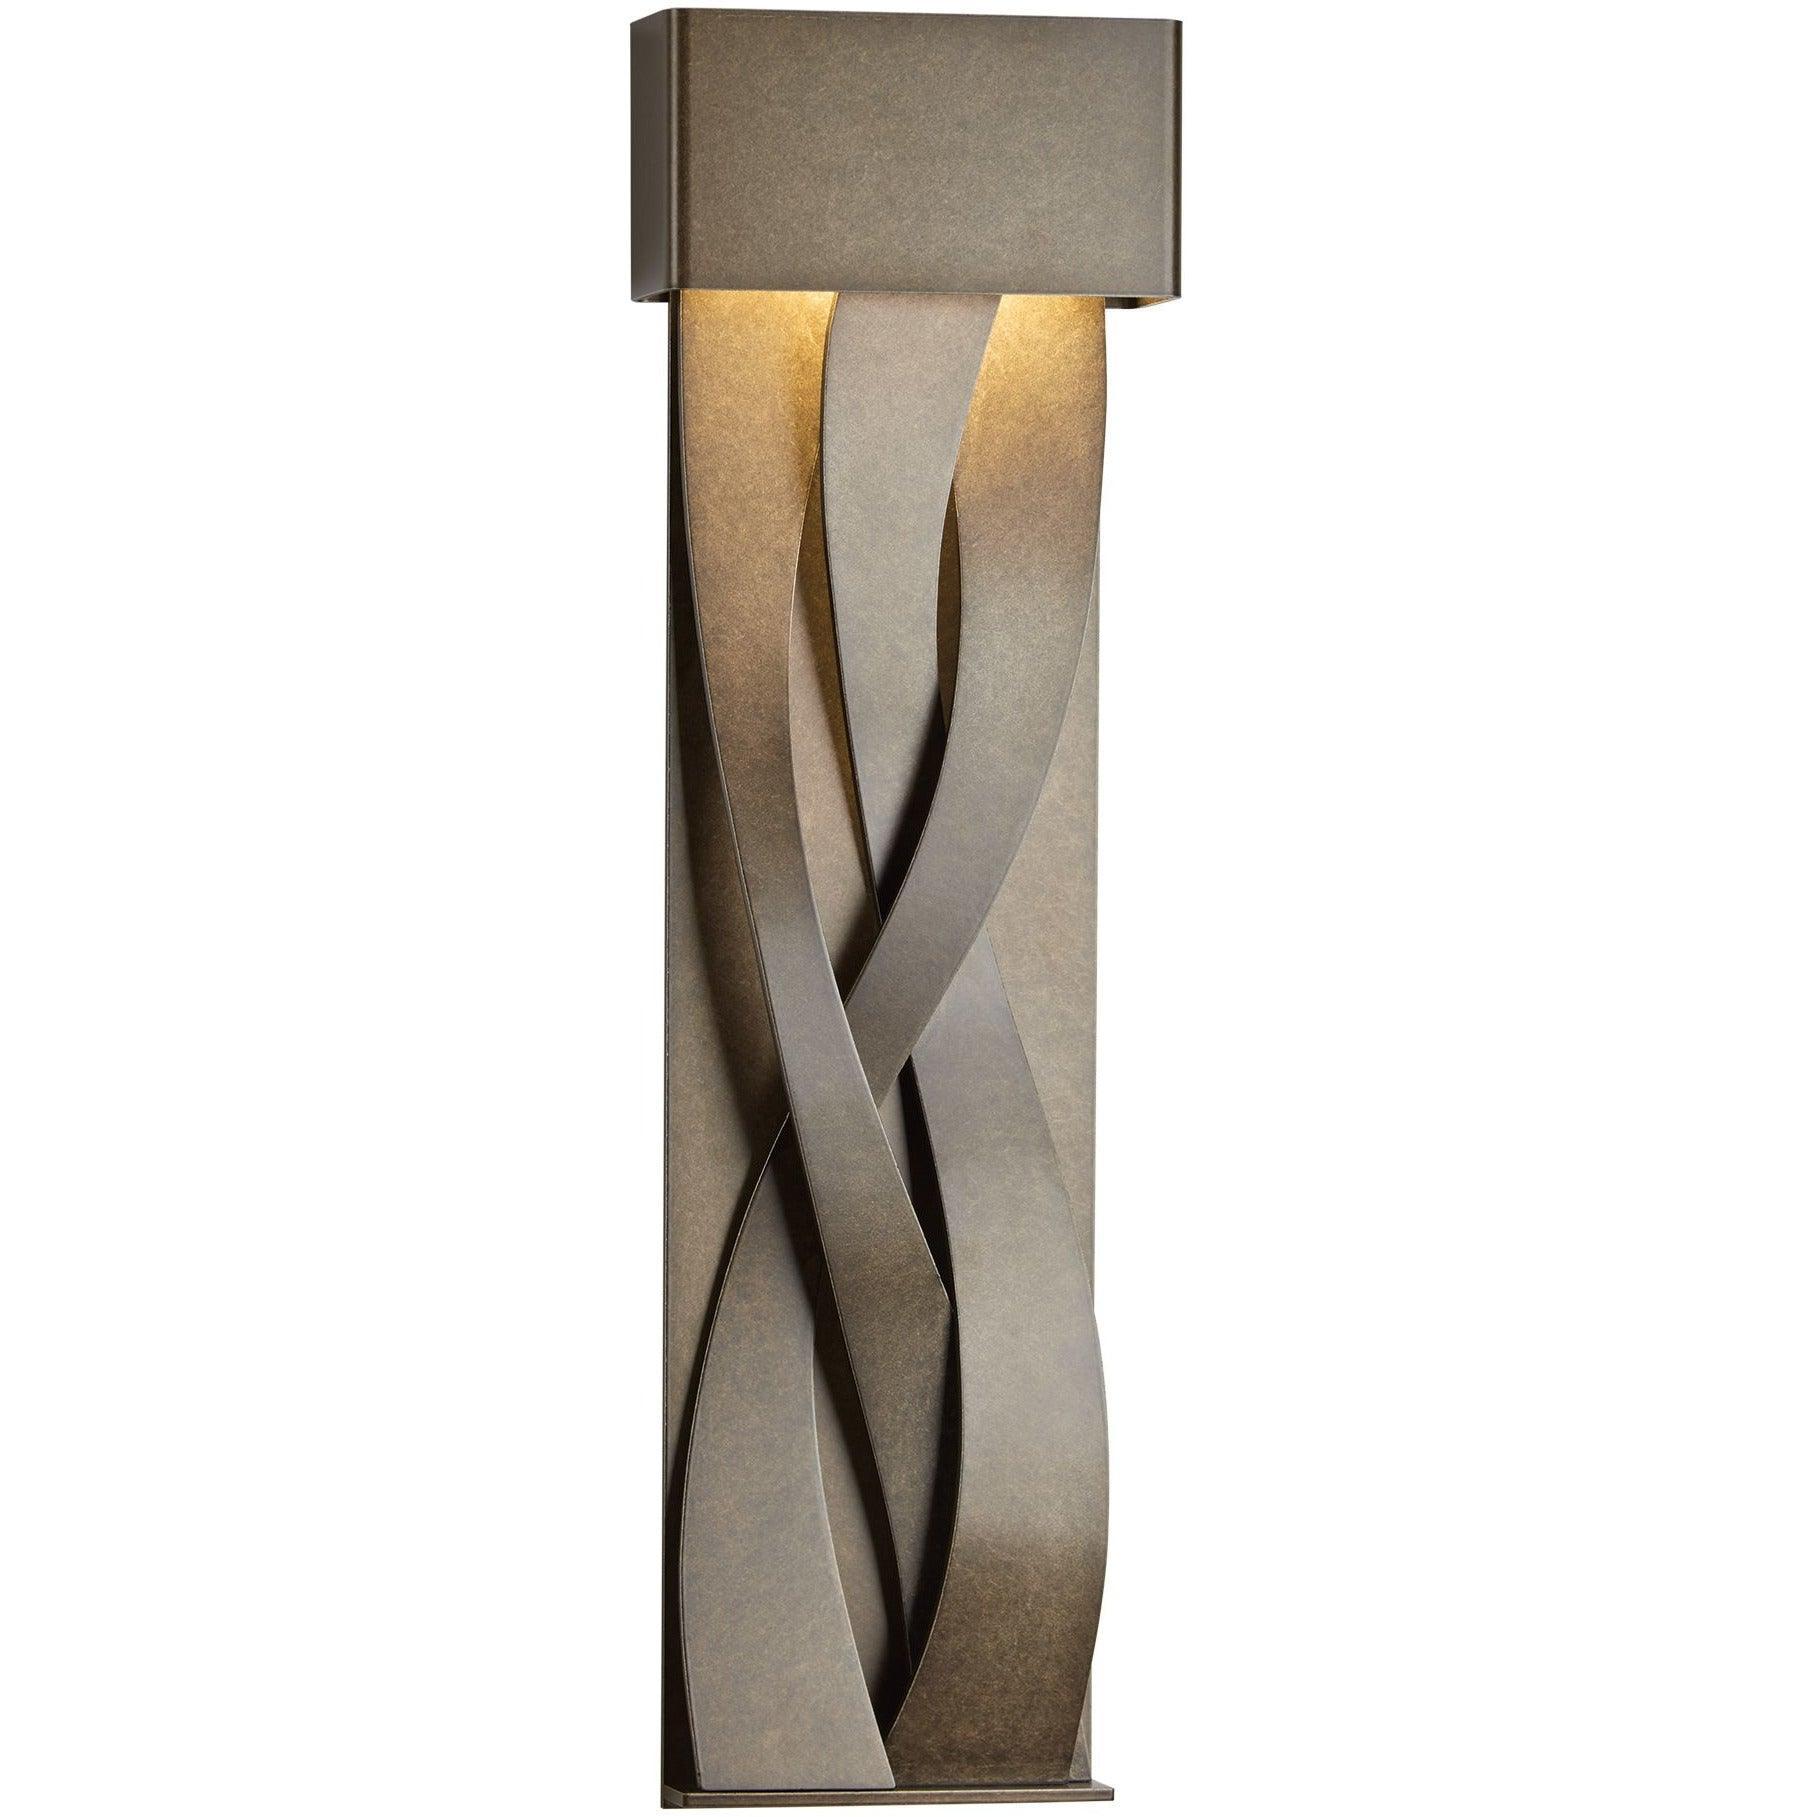 Hubbardton Forge - Tress 31-Inch LED Outdoor Wall Sconce - 302529-LED-75 | Montreal Lighting & Hardware